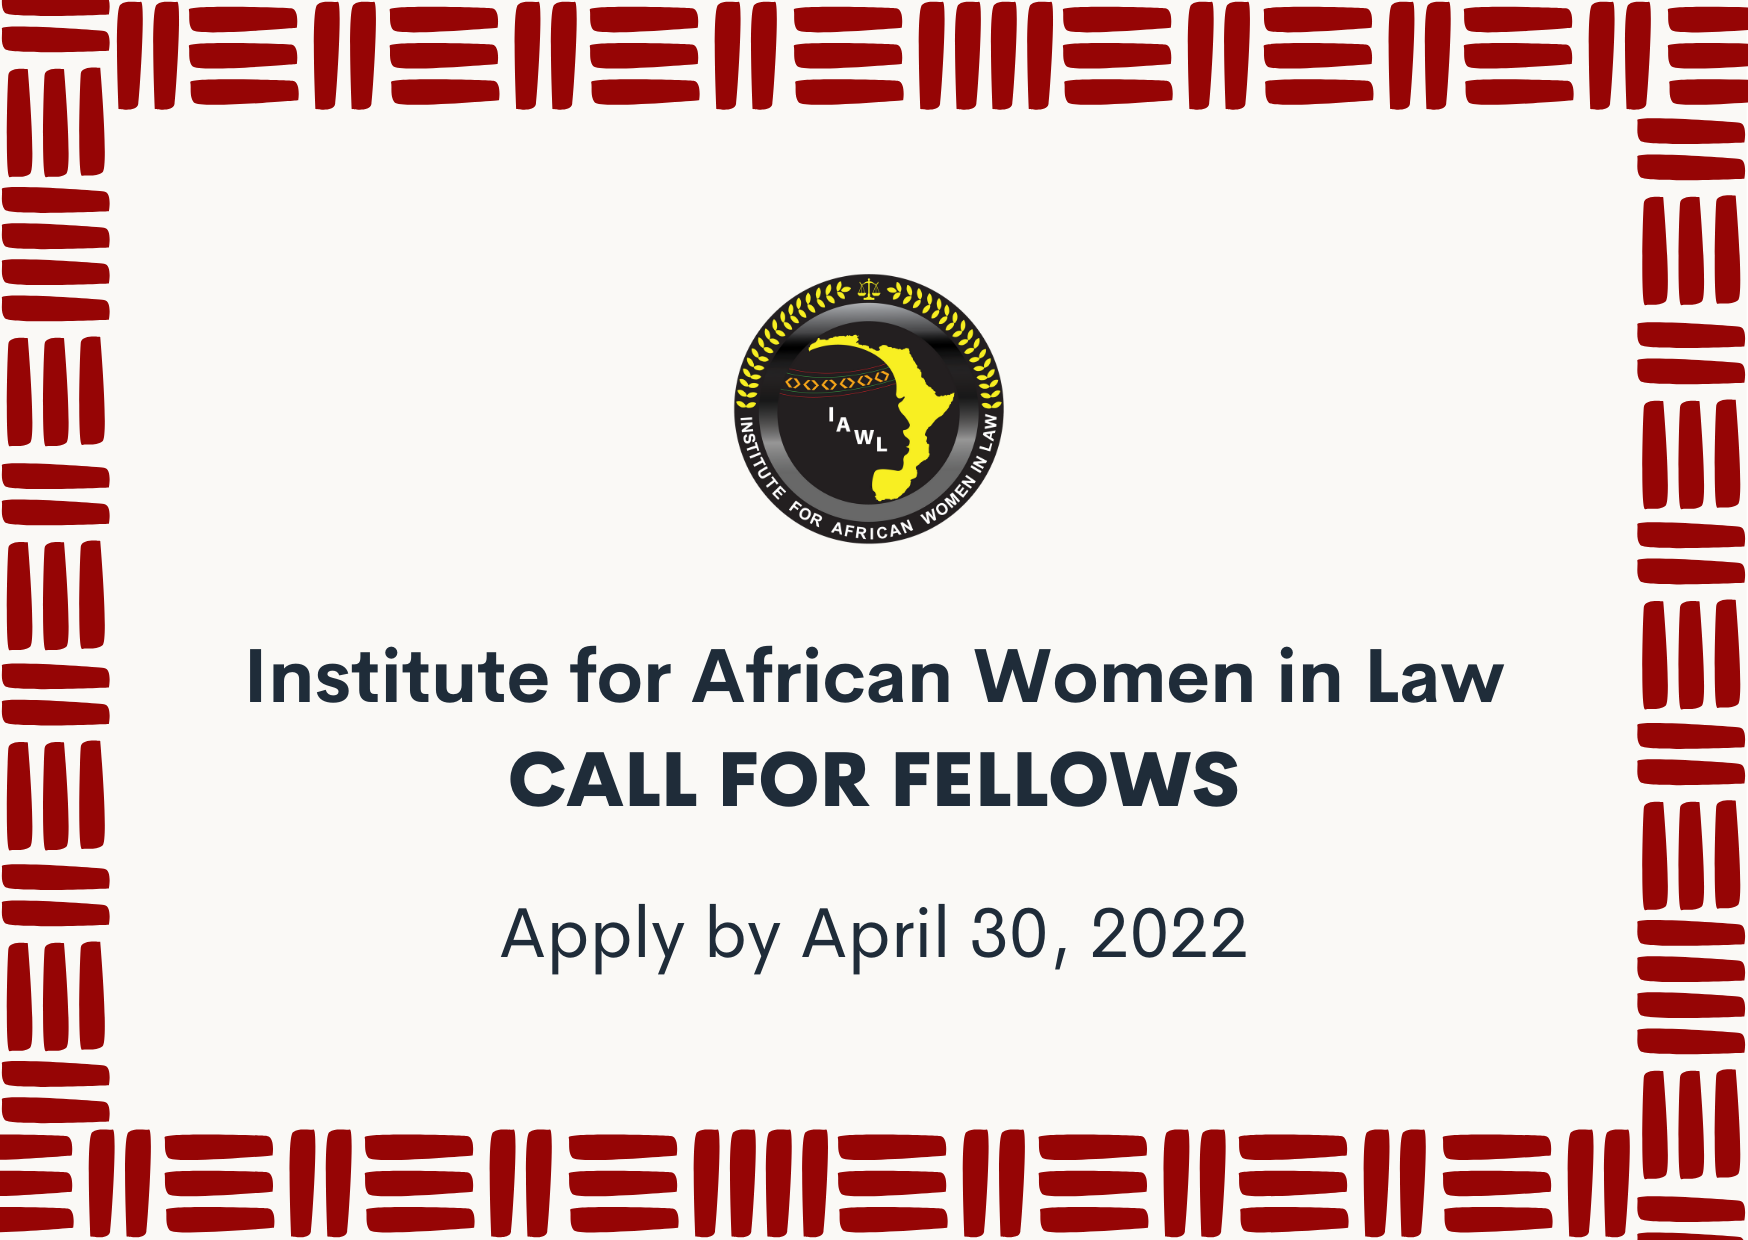 Institute for African Women in Law Fellowships 2022 – Call for Applications